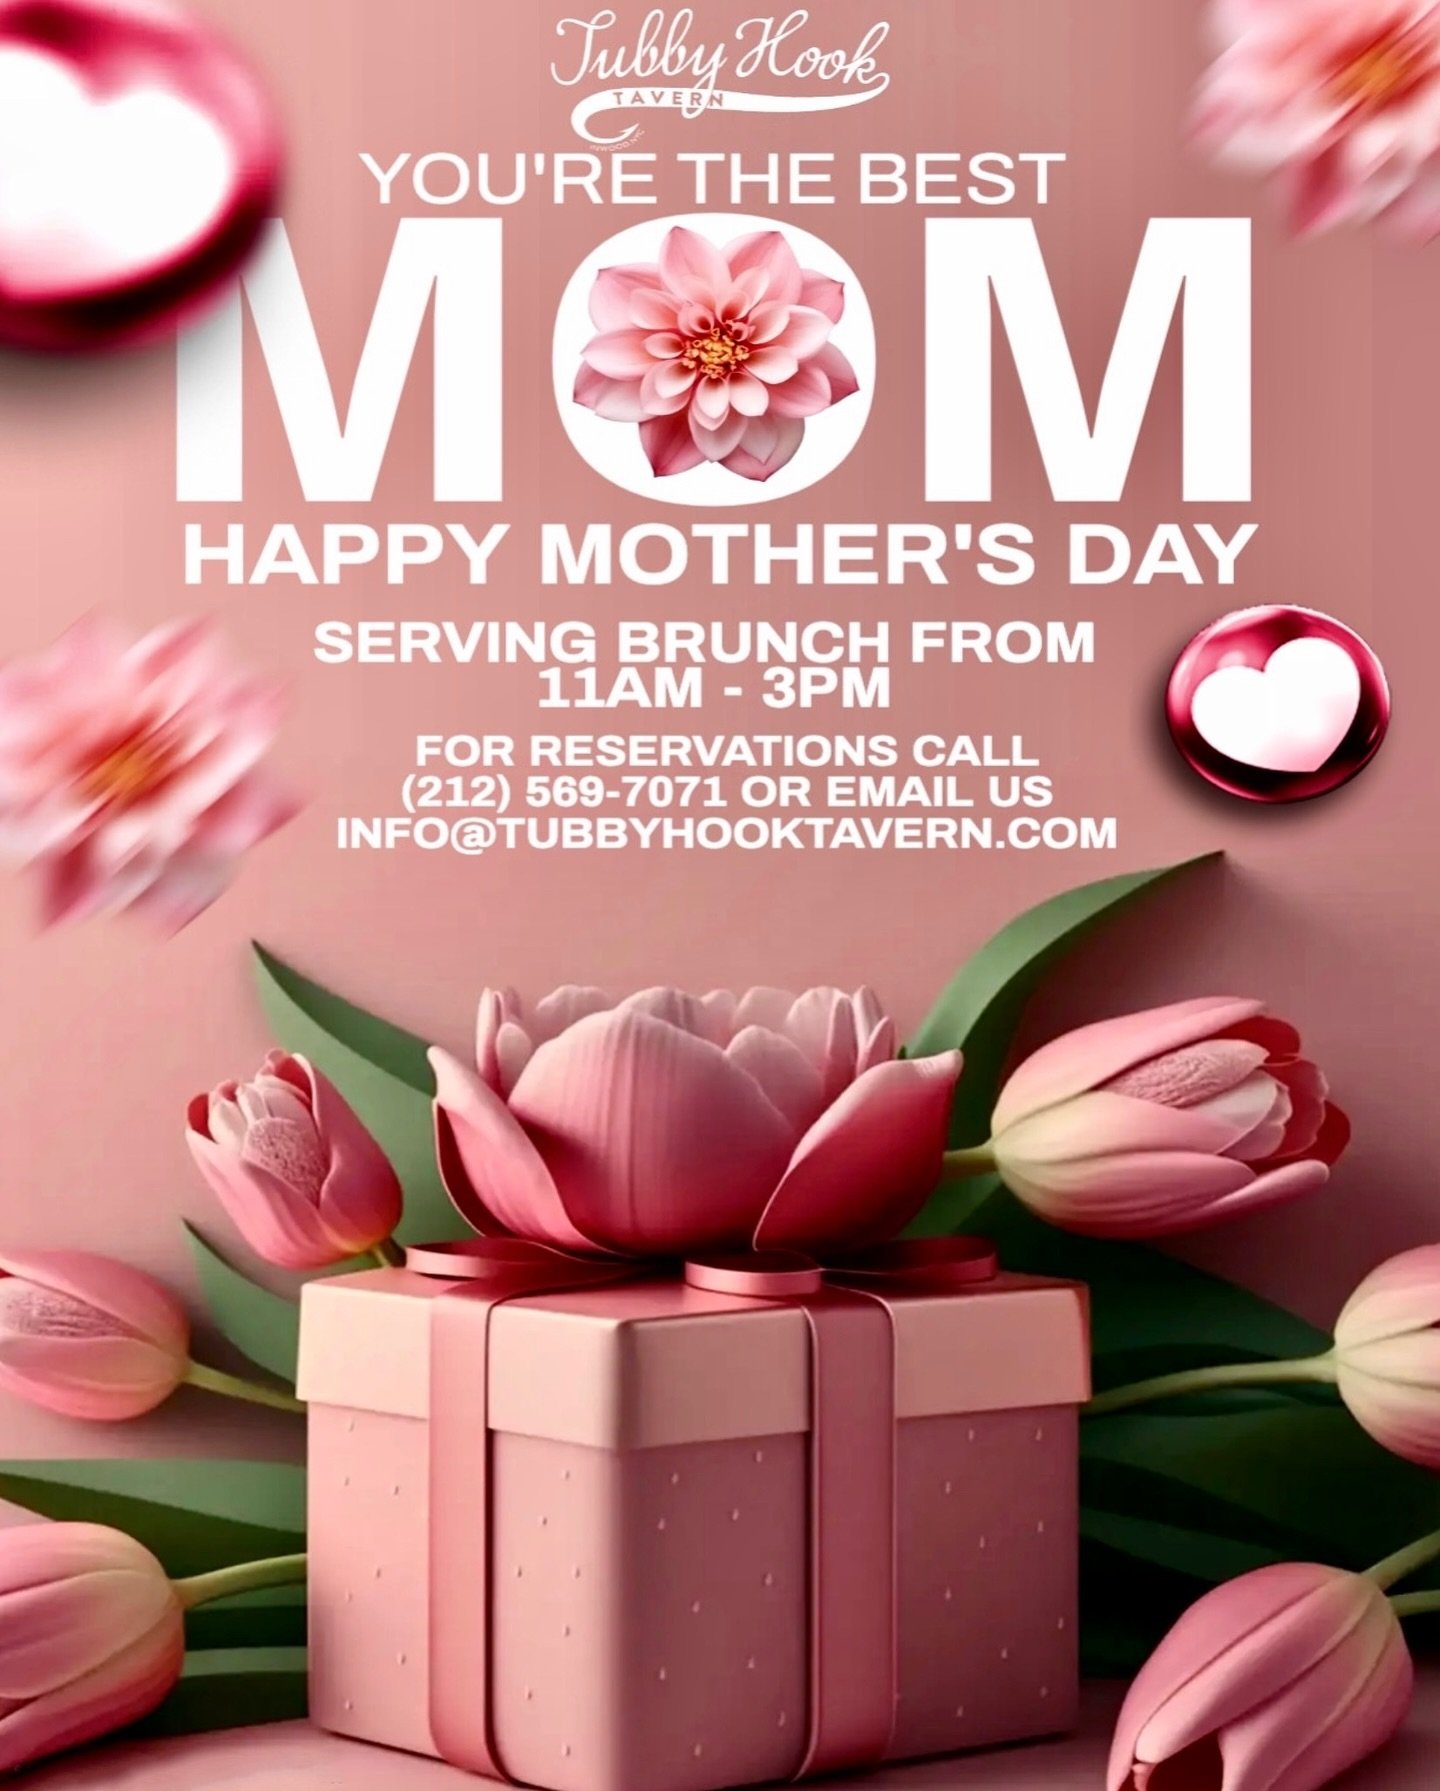 We are taking brunch reservations to celebrate the queens of our hearts! 🌸✨ Happy Mother&rsquo;s Day to all the amazing moms out there tomorrow May 12th. Let&rsquo;s raise a mimosa to the ones who&rsquo;ve nurtured us, inspired us, and loved us unco